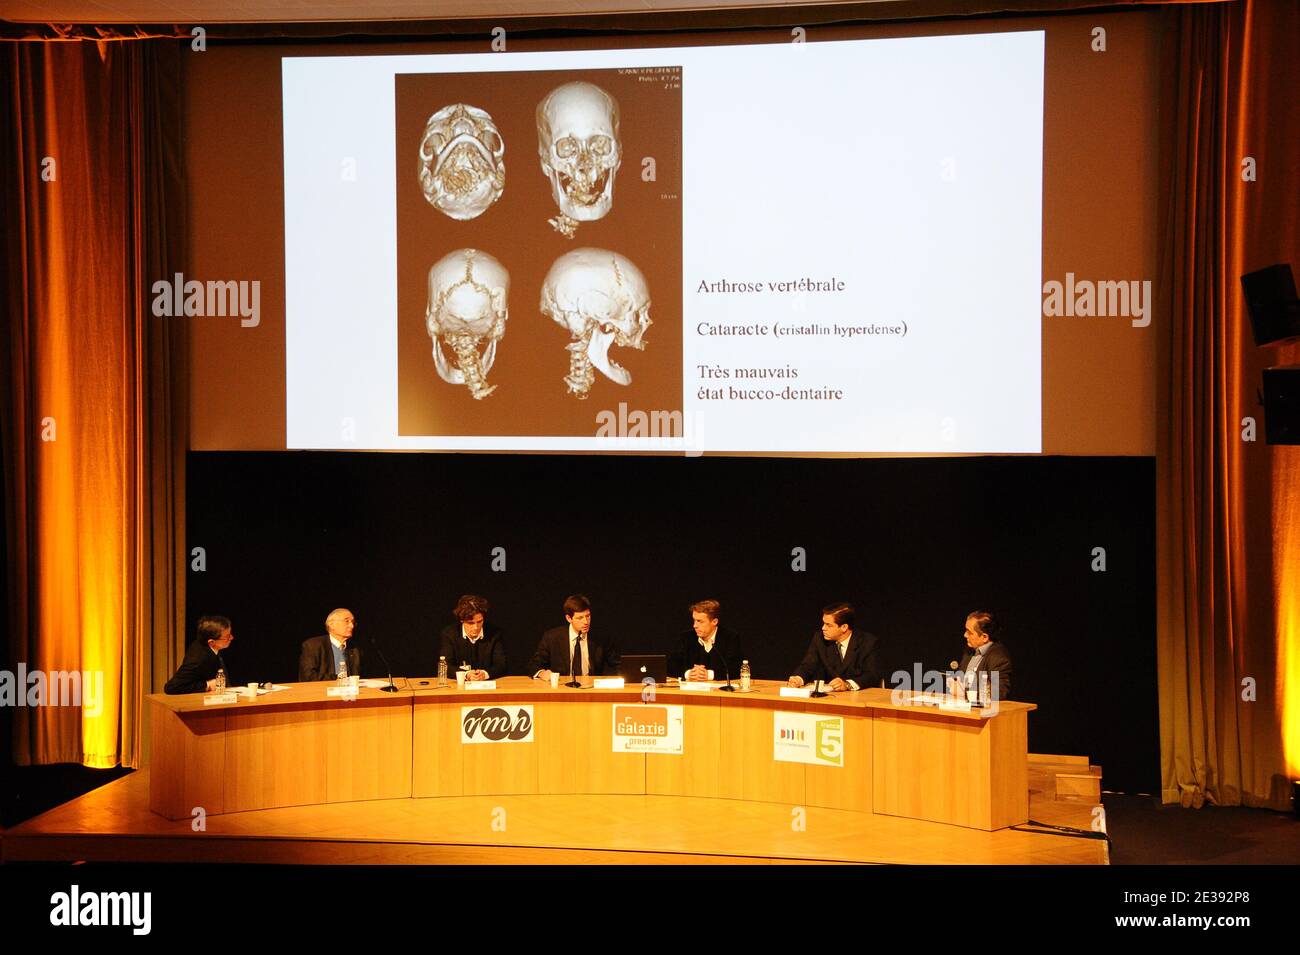 French doctor Philippe Charlier among other scientists said they have identified an embalmed head as belonging to King Henri IV of France, who was assassinated in 1610 at the age of 57 during a press conference held at Grand Palais in Paris, France on December 16, 2010. The head was lost after revolutionaries ransacked the royal chapel at Saint Denis, near Paris, in 1793. A head, presumed to be that of Henri IV, has passed between private collectors since then. Photo by Nicolas Briquet/ABACAPRESS.COM Stock Photo